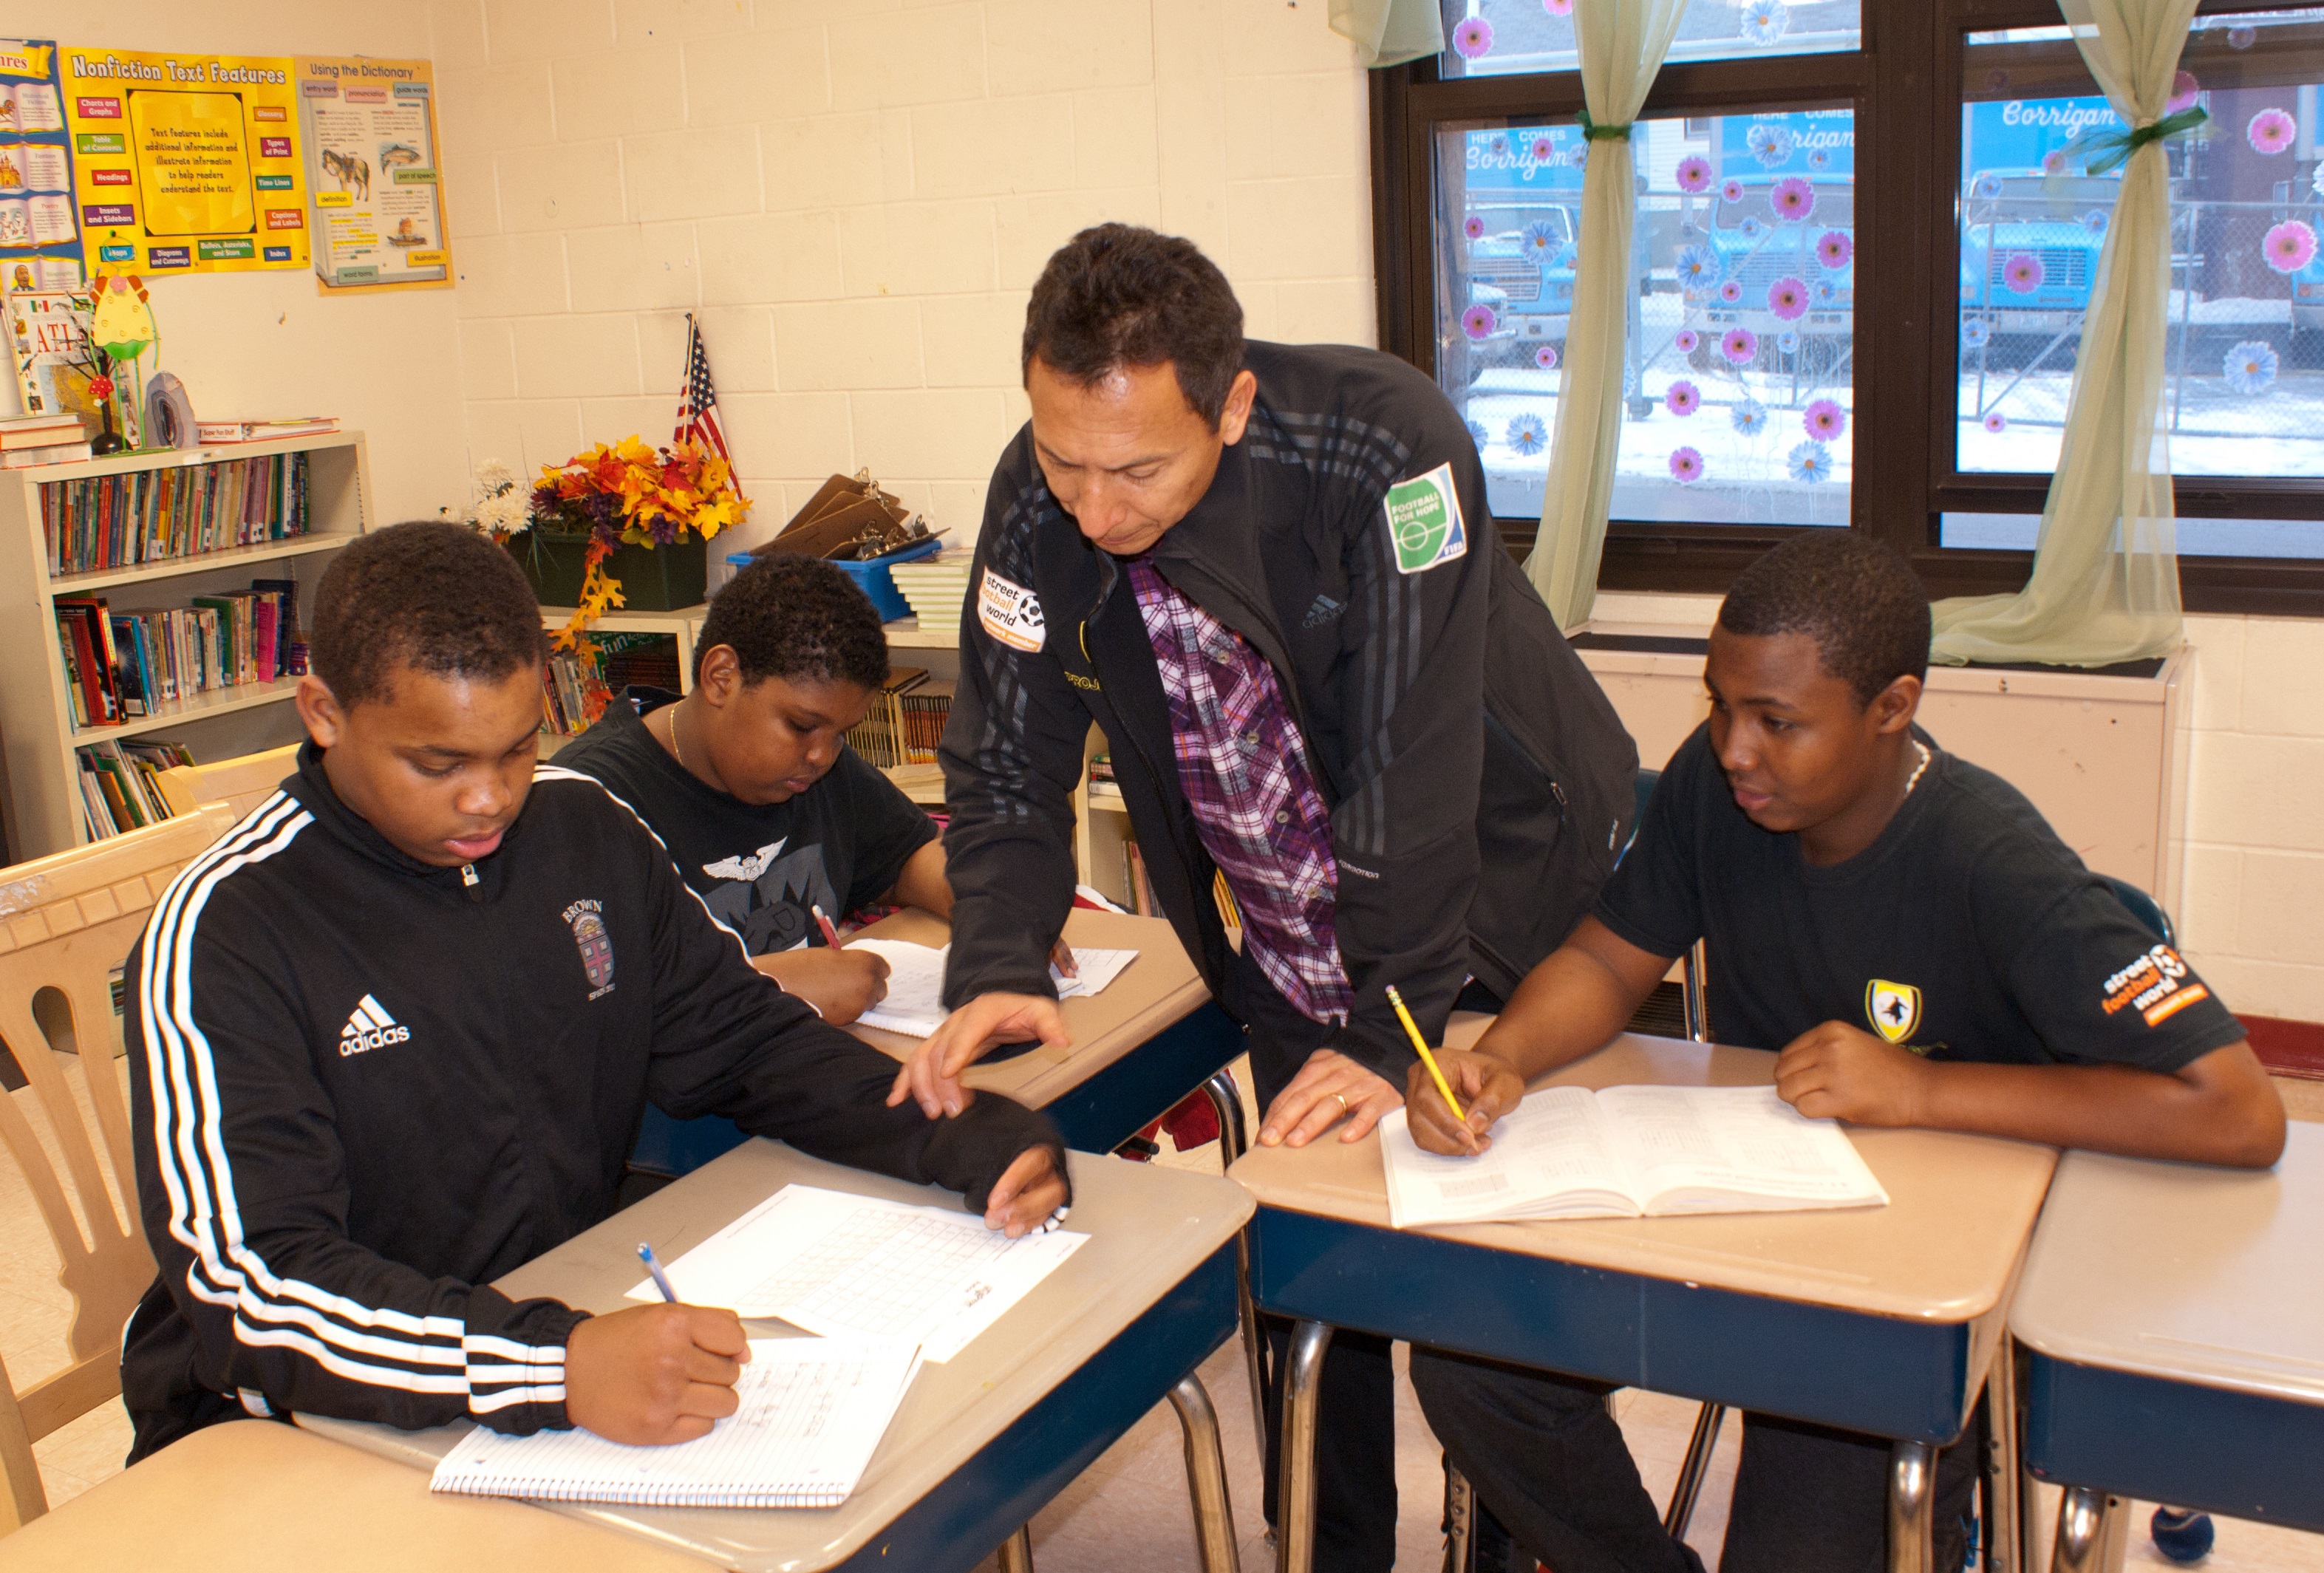 Project GOAL instructor Javier Gallego (center) assists Calcutt Middle School students Kevin Moreira. (left) and Junior Varela. with math homework. Also pictured (background) is Evanilson Gomes., anot